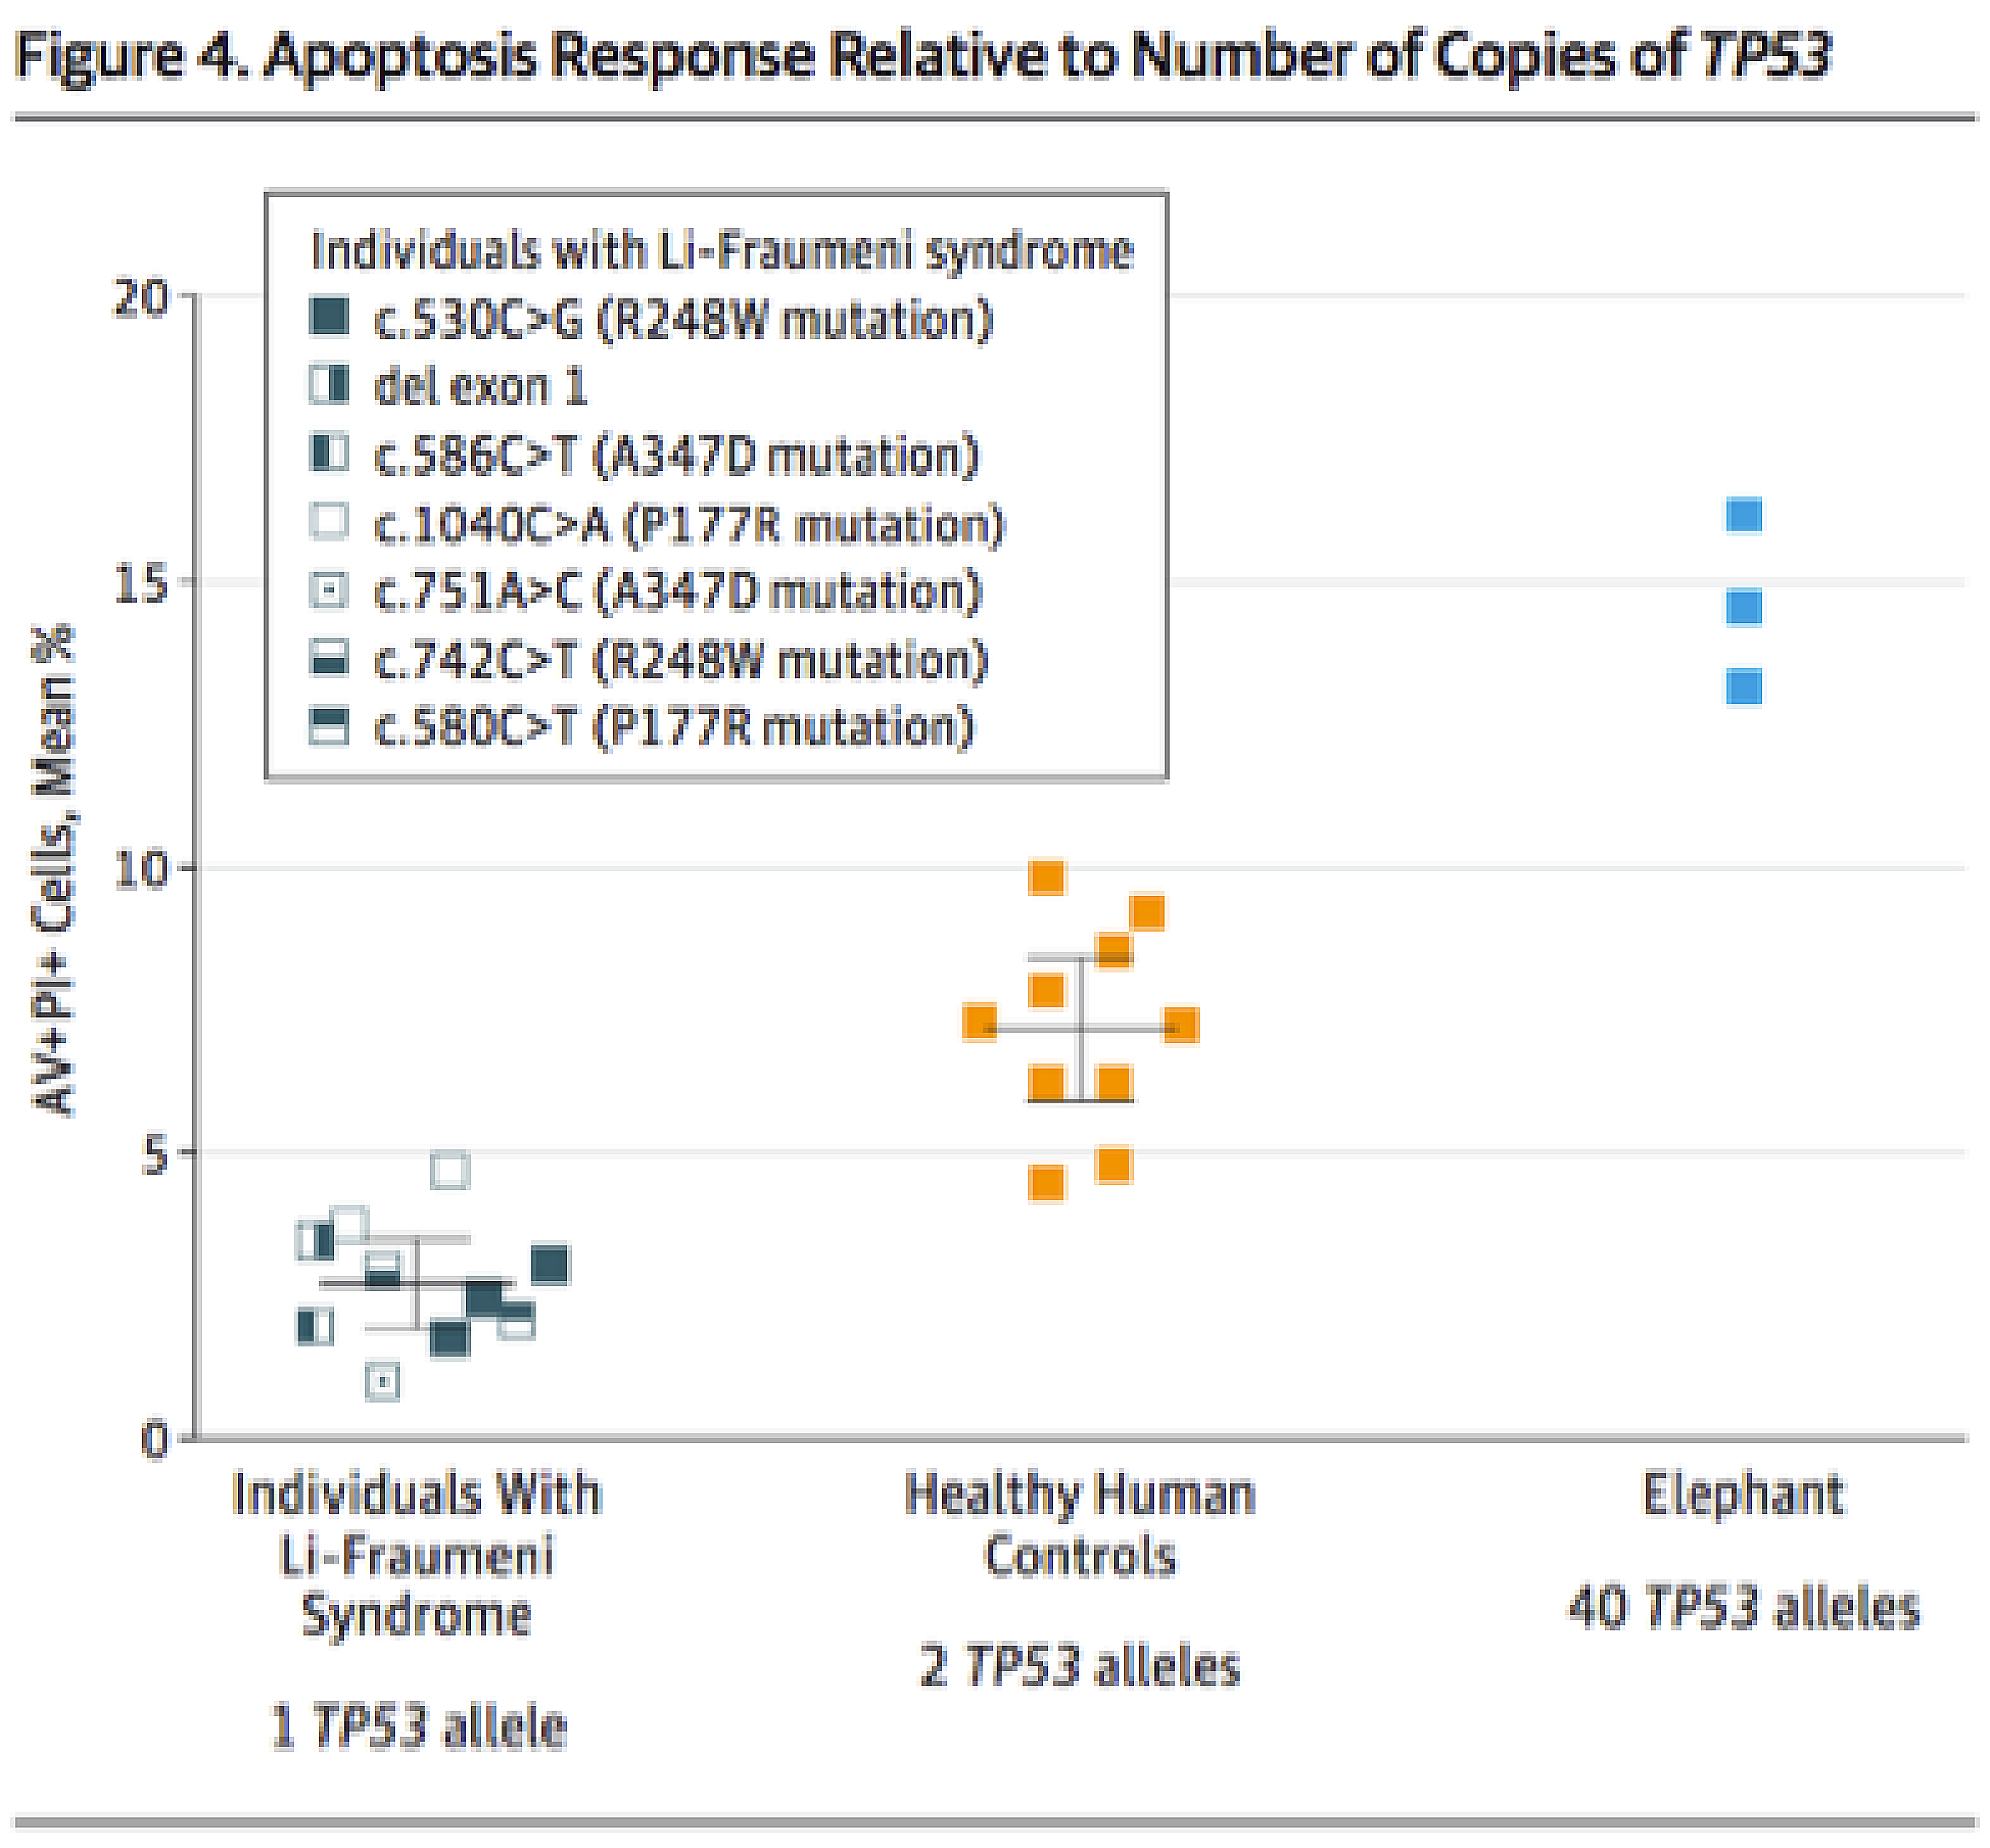 Graph of apoptosis response relative to number of copies of TP53